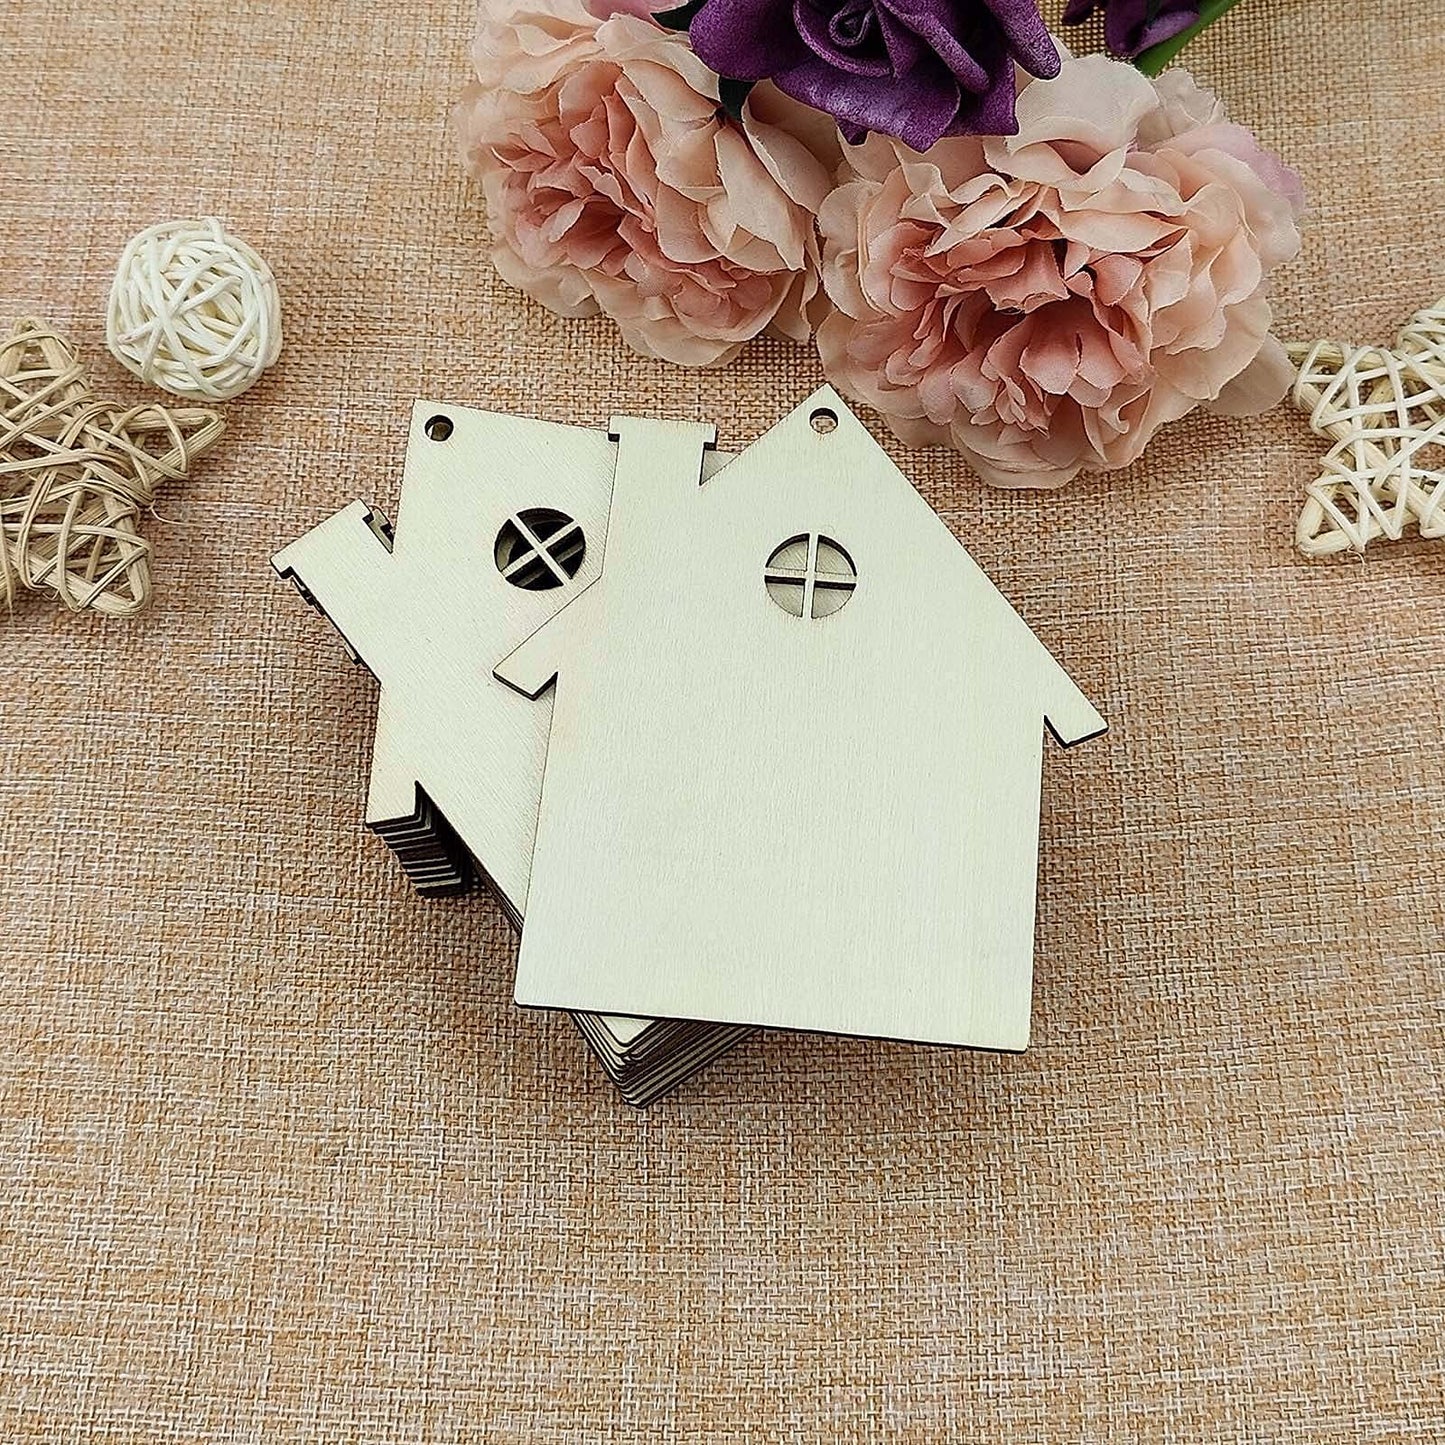 Creaides House Wood DIY Craft Cutout Wooden House Shaped Hanging Ornaments with Hole Hemp Ropes Gift Tags for Wedding Birthday Christmas Party